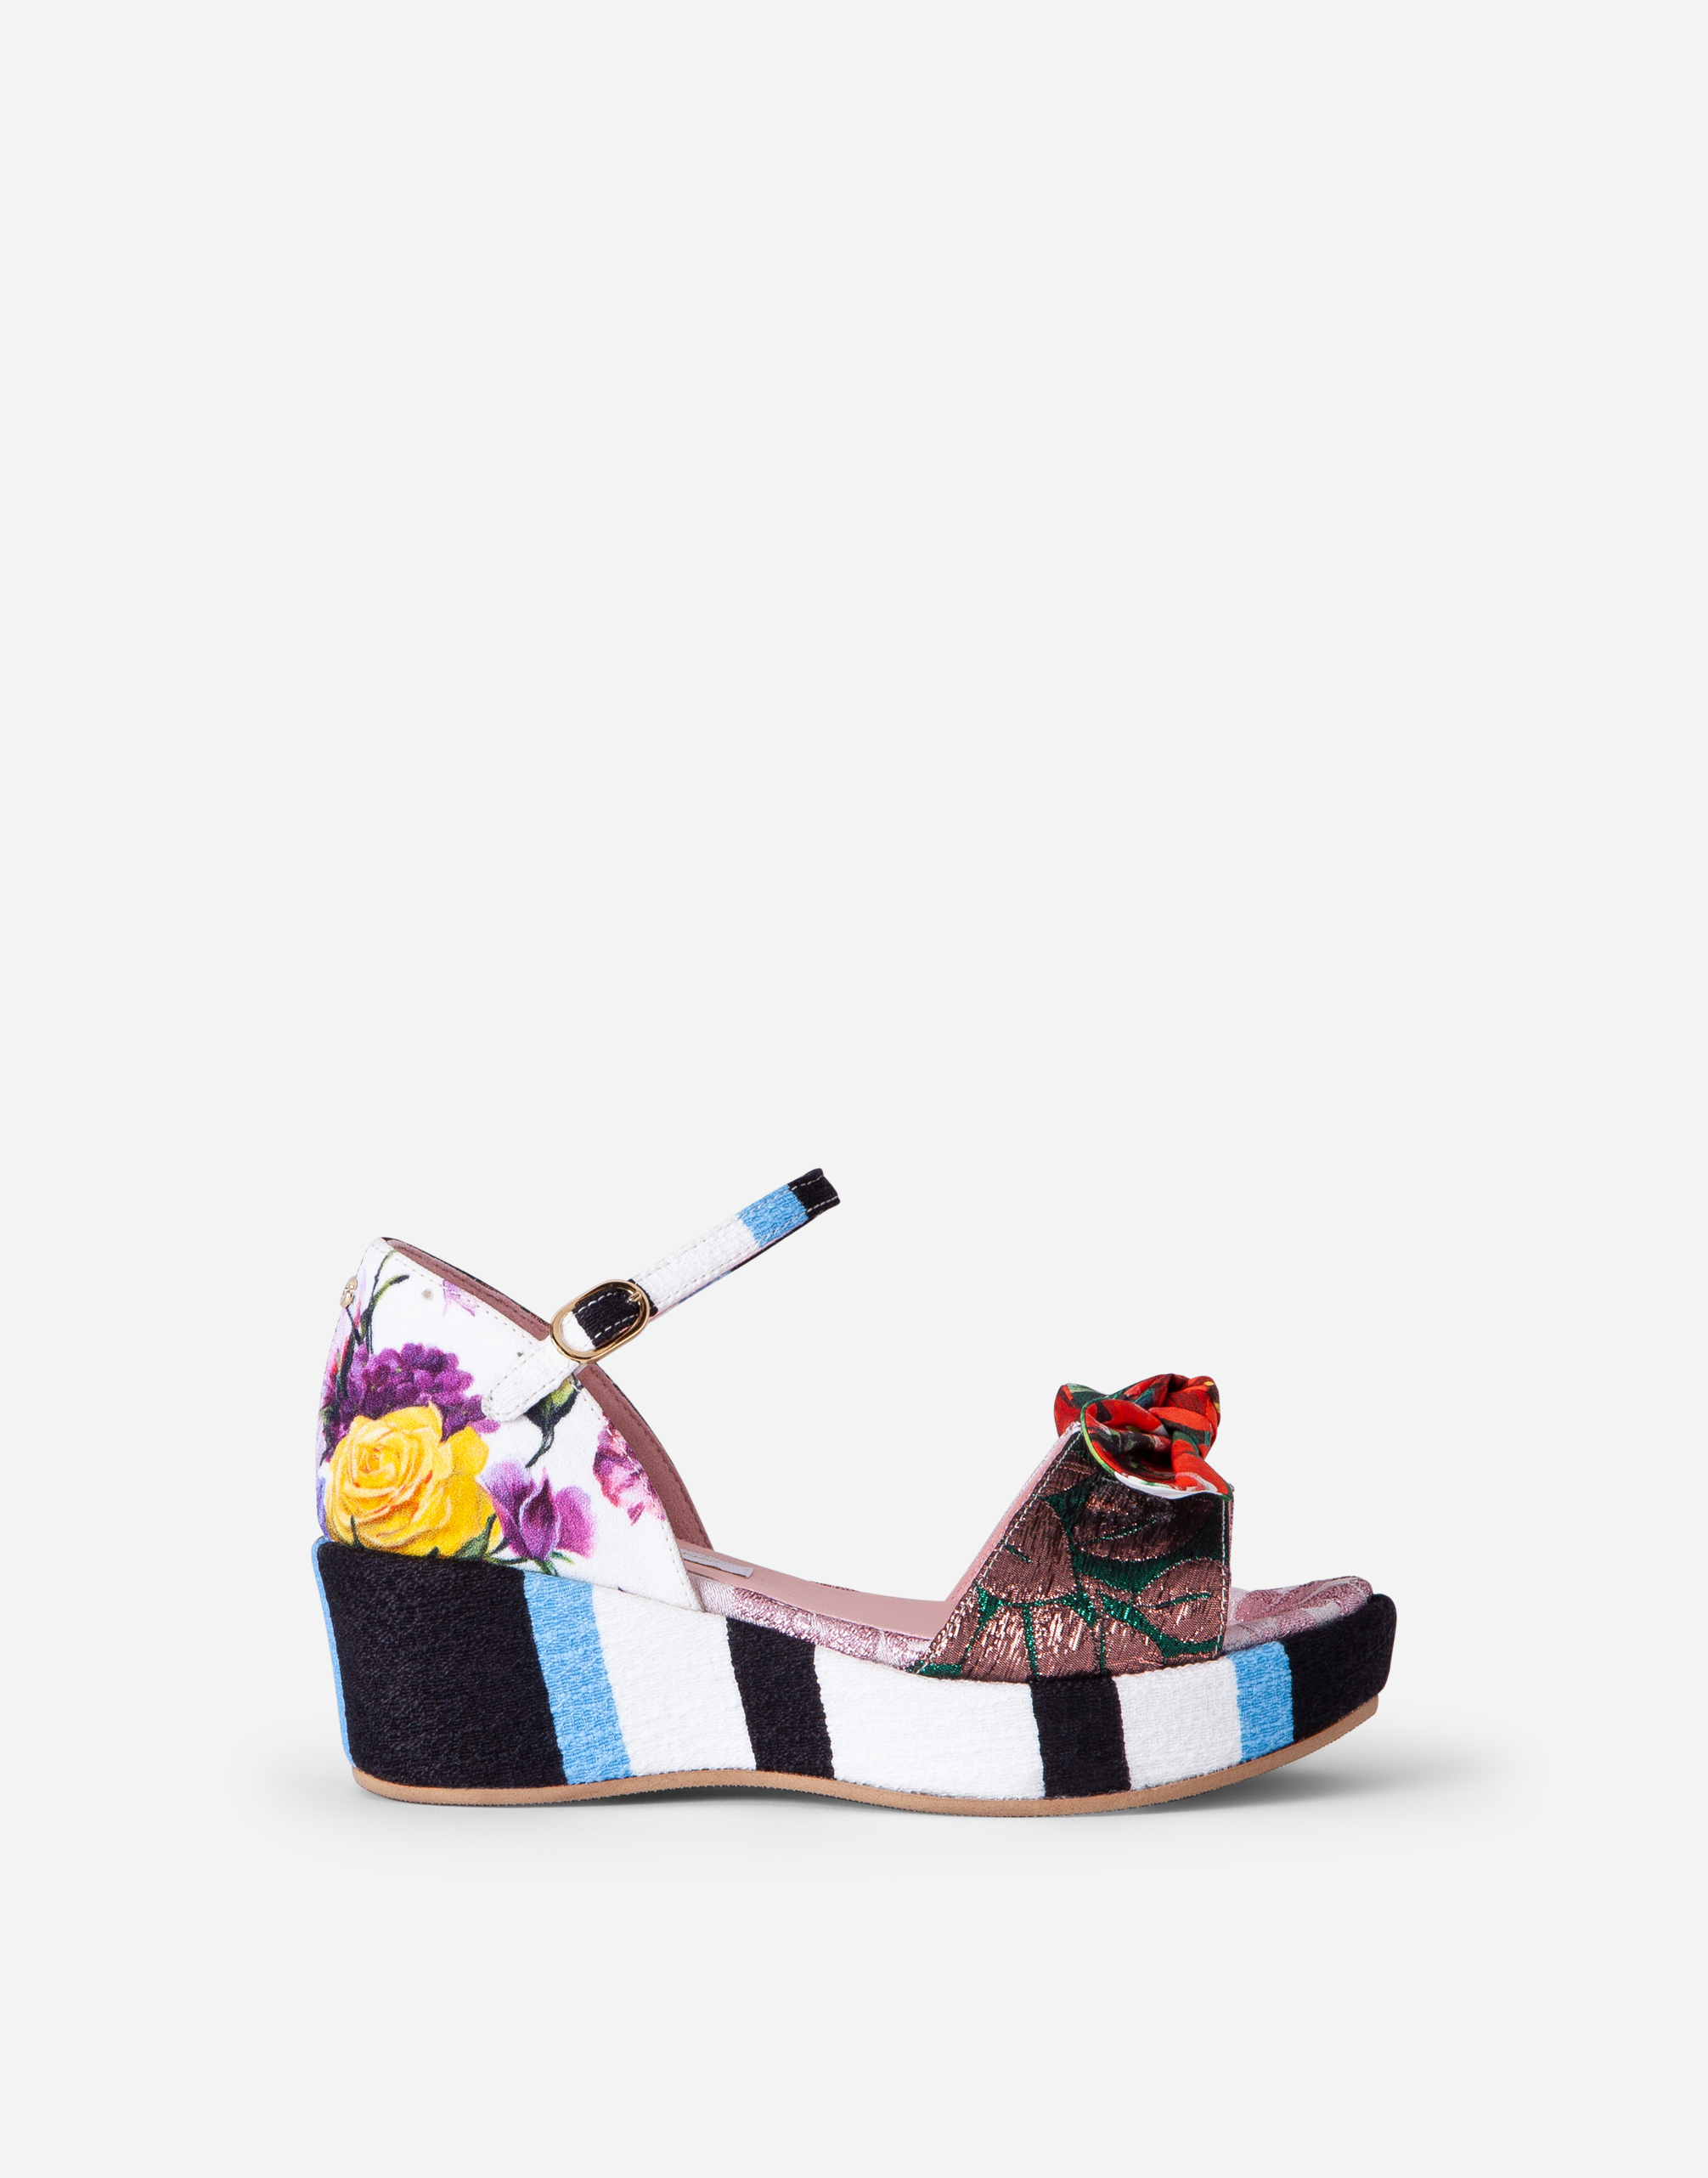 Dolce & Gabbana Kids' Patchwork Fabric Wedges With Bow